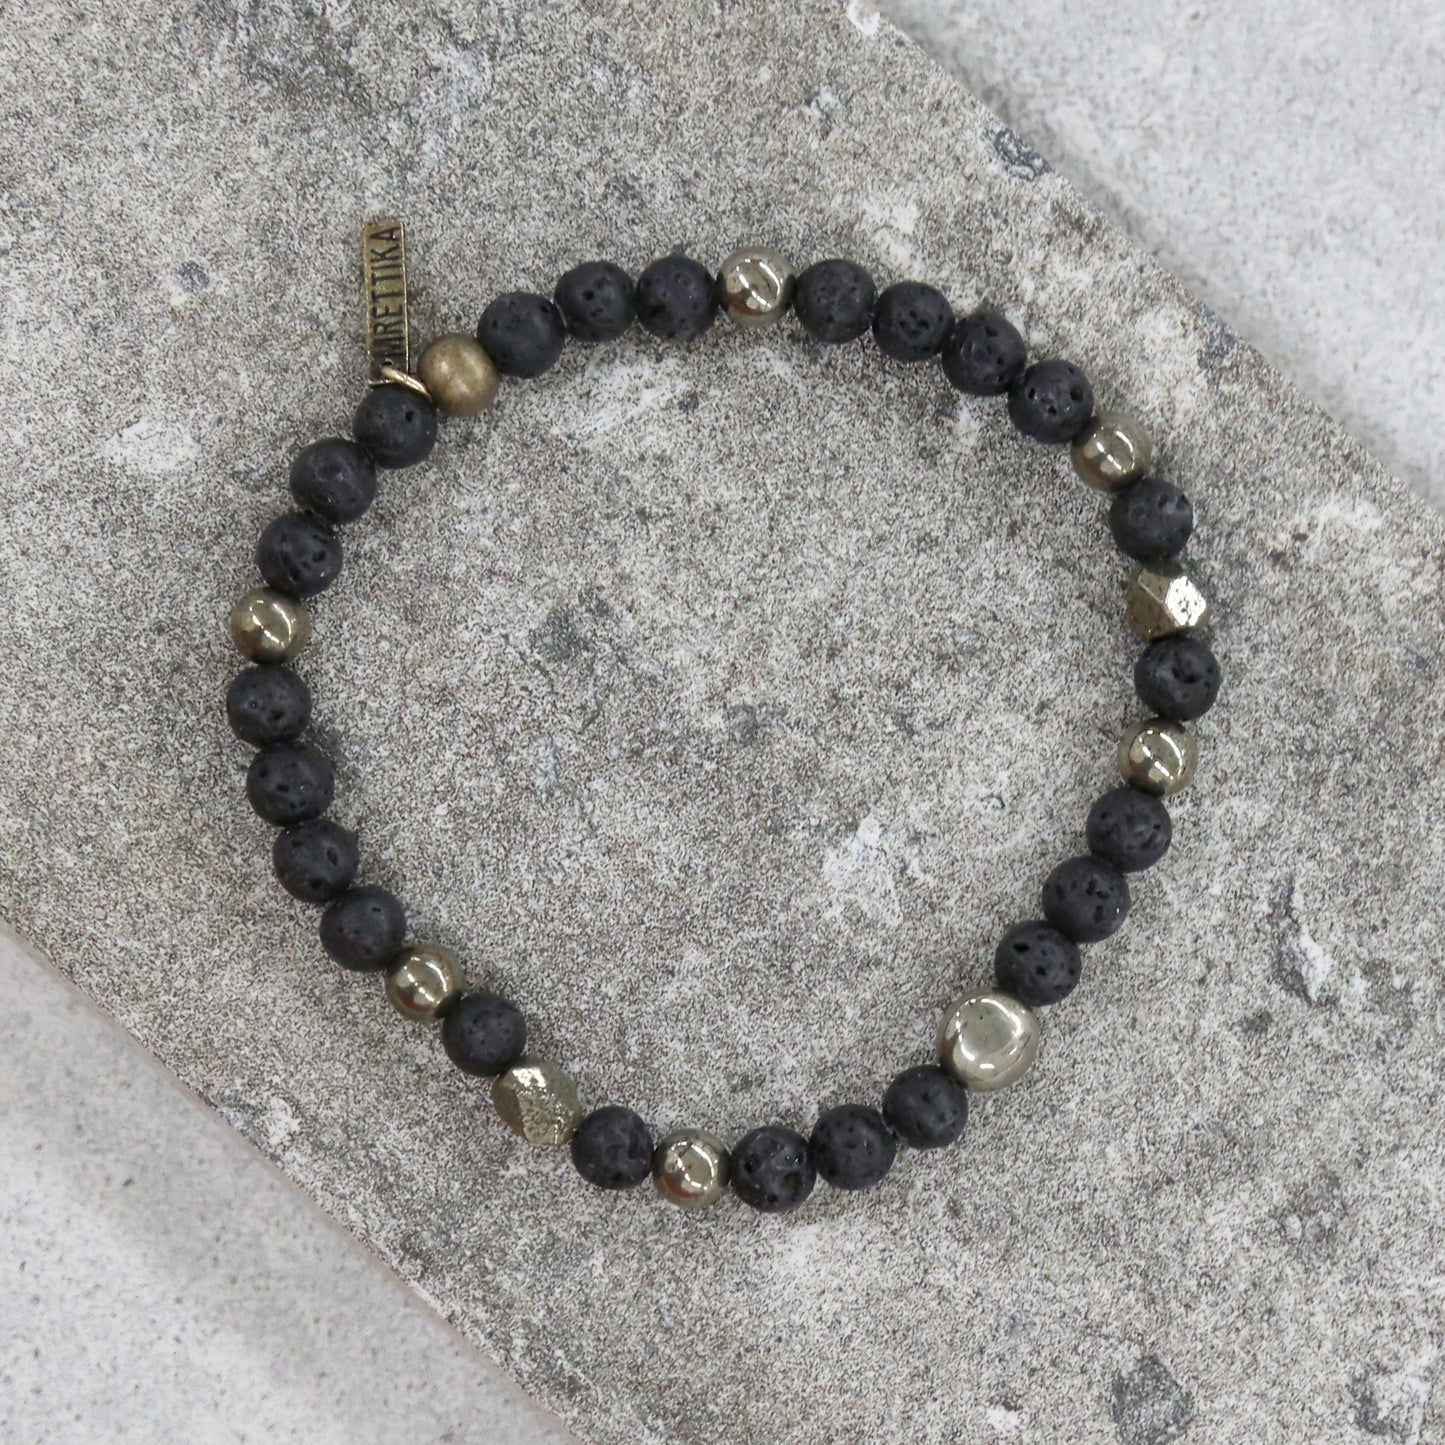 Igneous Bracelet in Lava Bead, Pyrite, and Brass